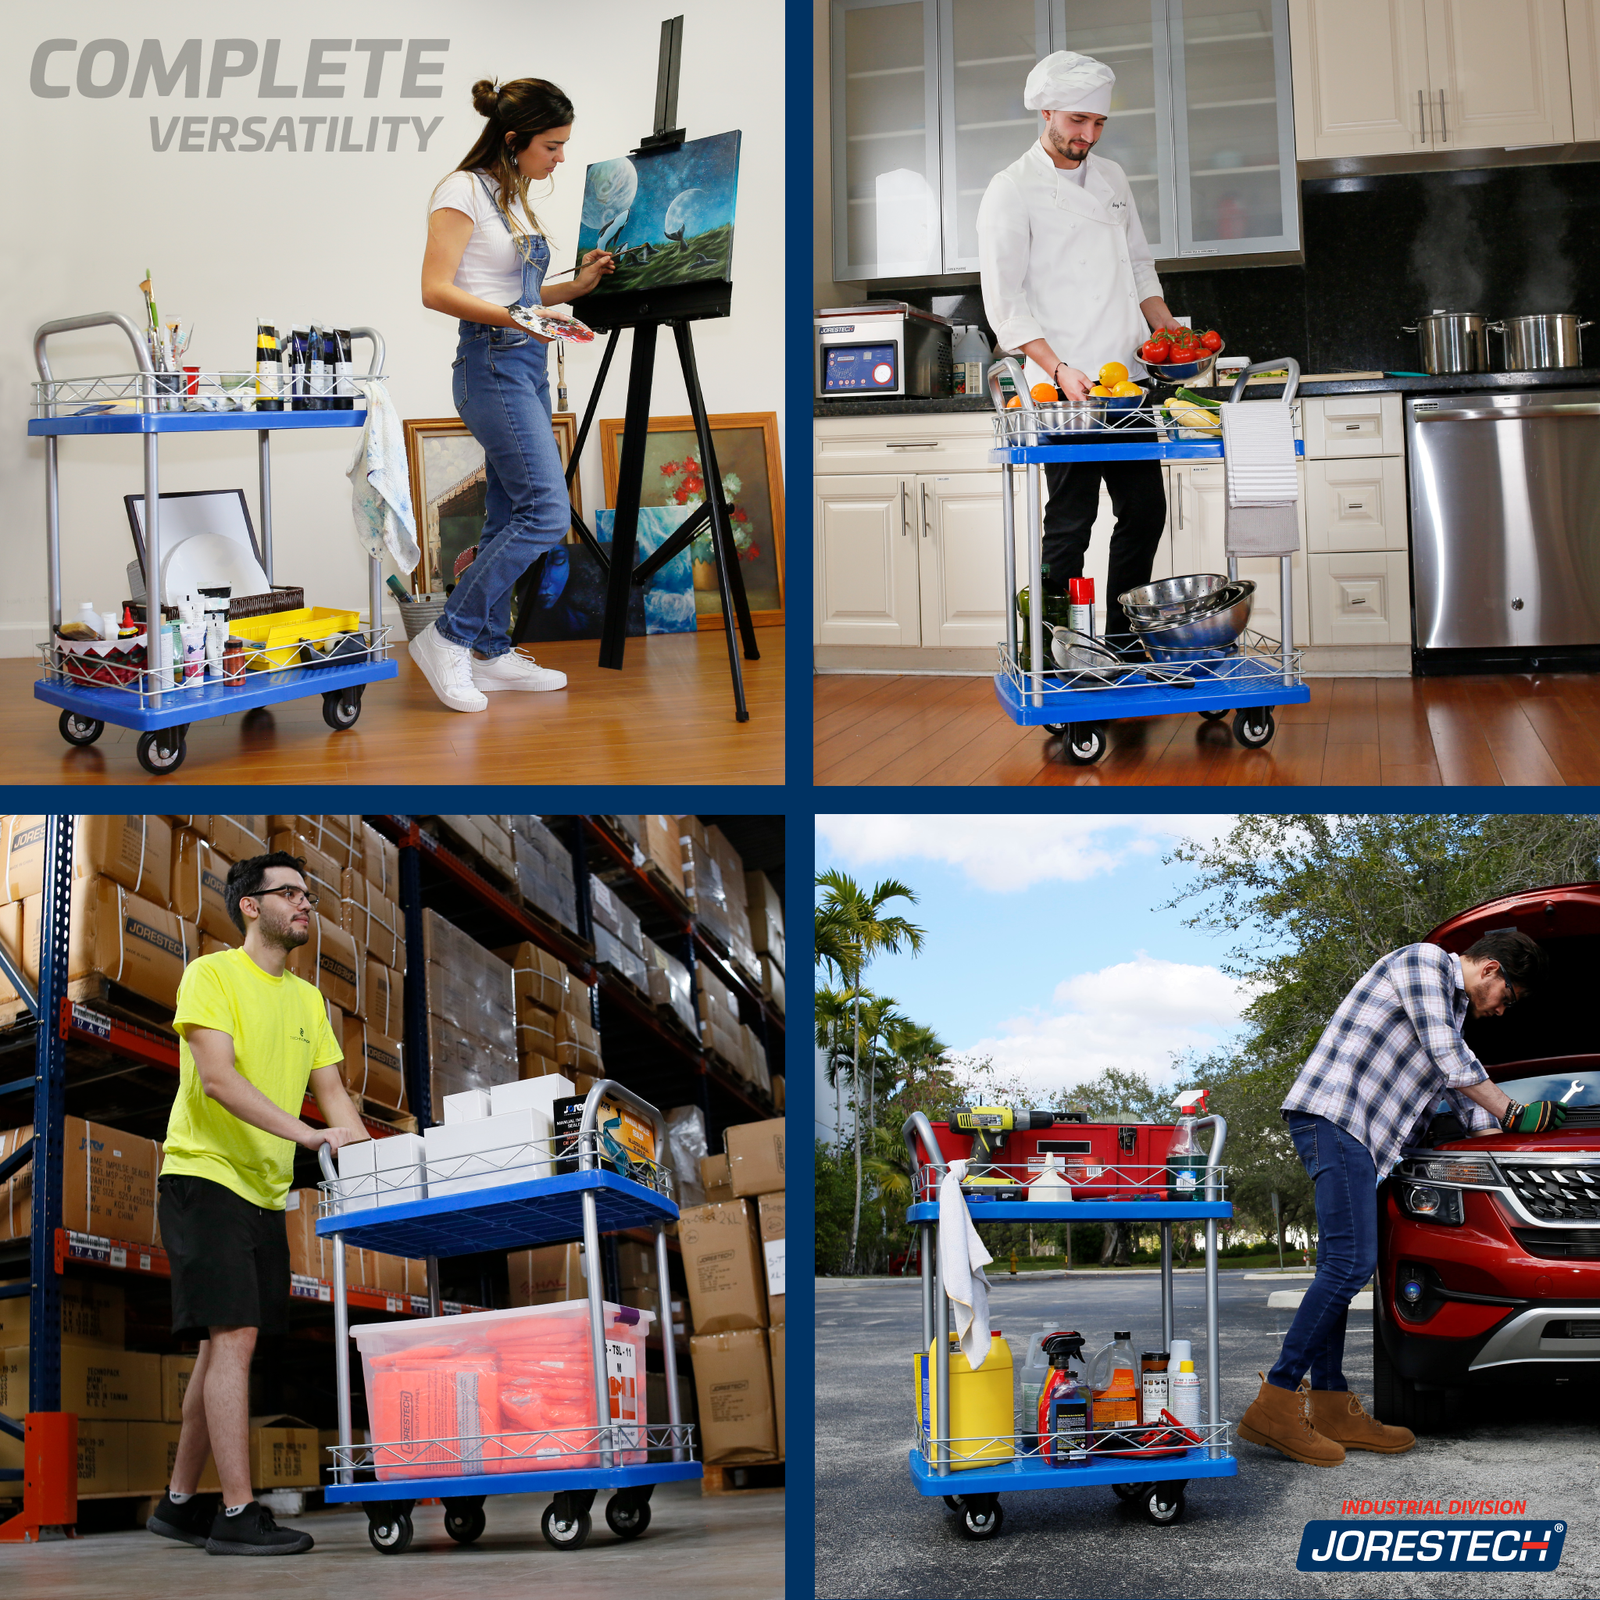 Banner split in four showing the JORES TECHNOLOGIES® 2 shelf utility cart being used in an art studio, in a professional kitchen, in a warehouse, and for doing car mechanic